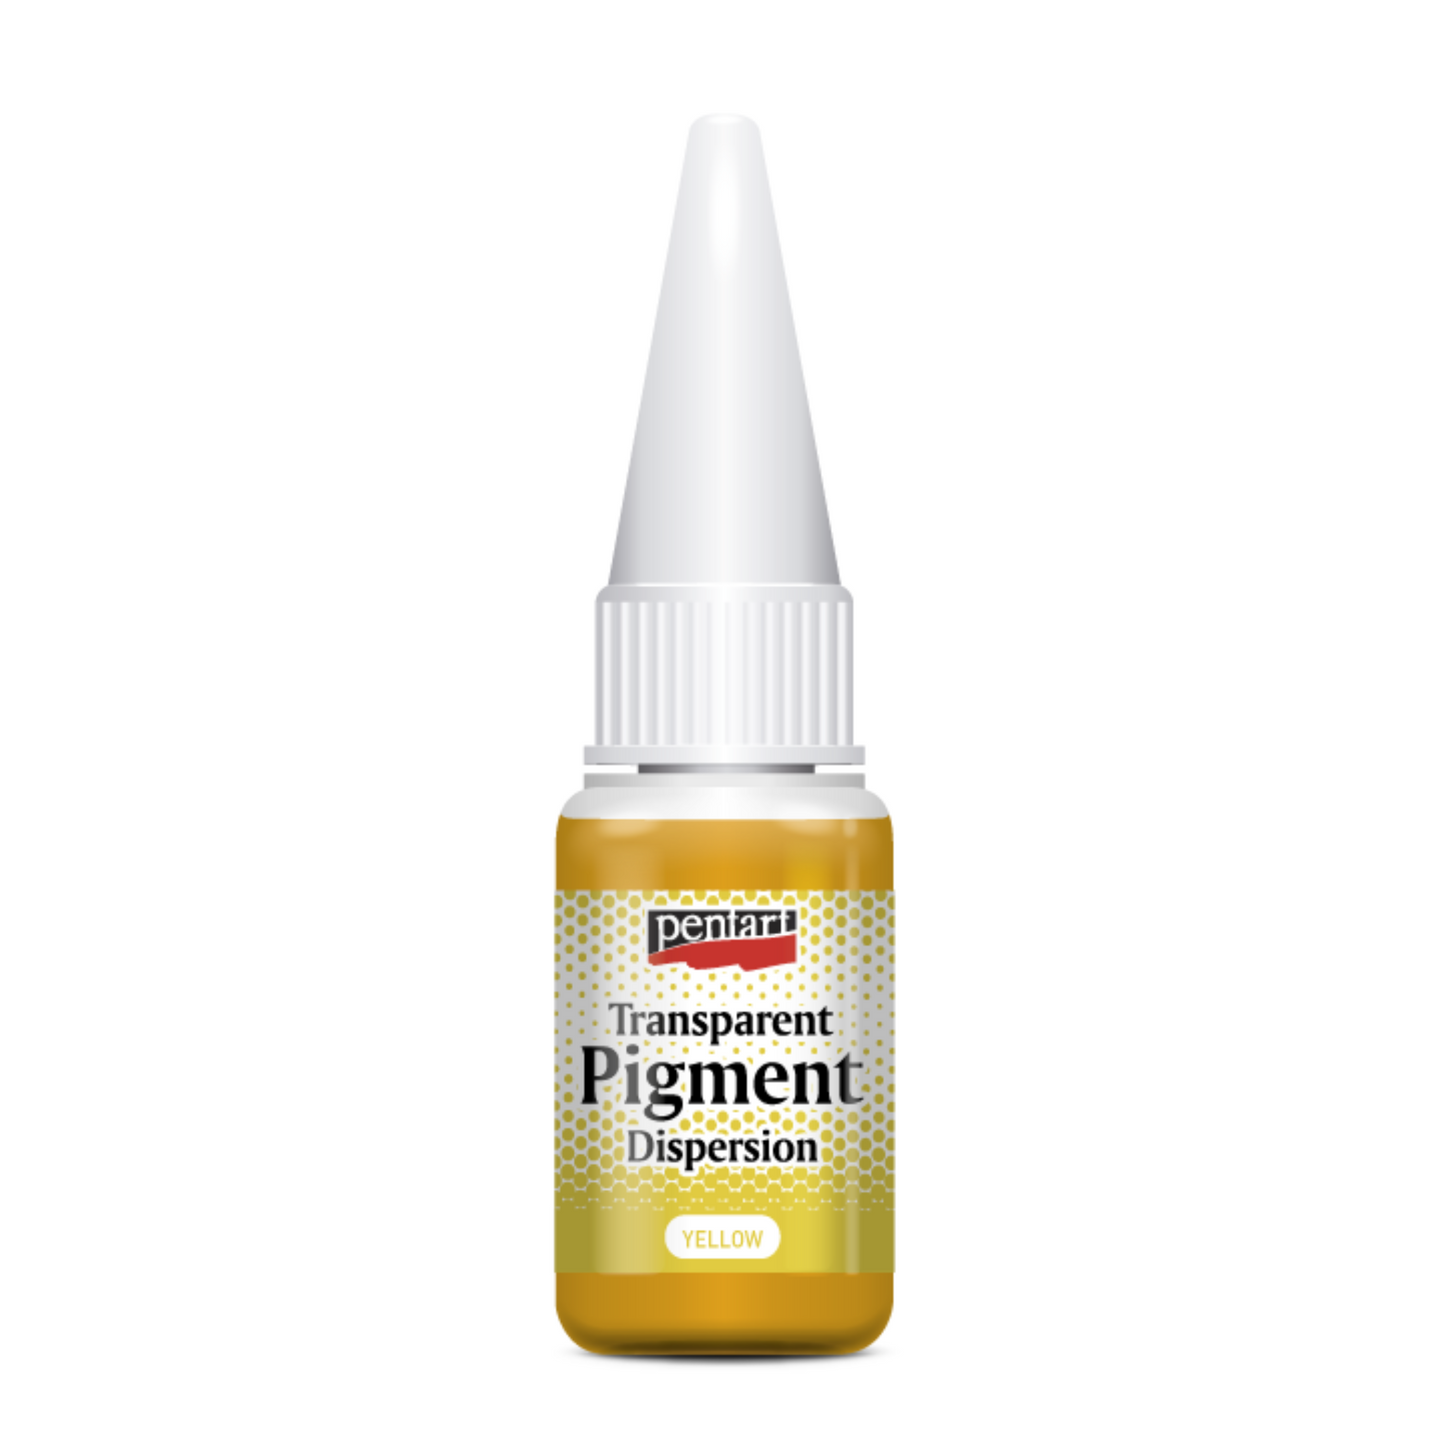 Transparent Pigment Dispersion in Yellow by Pentart available at Milton's Daughter.